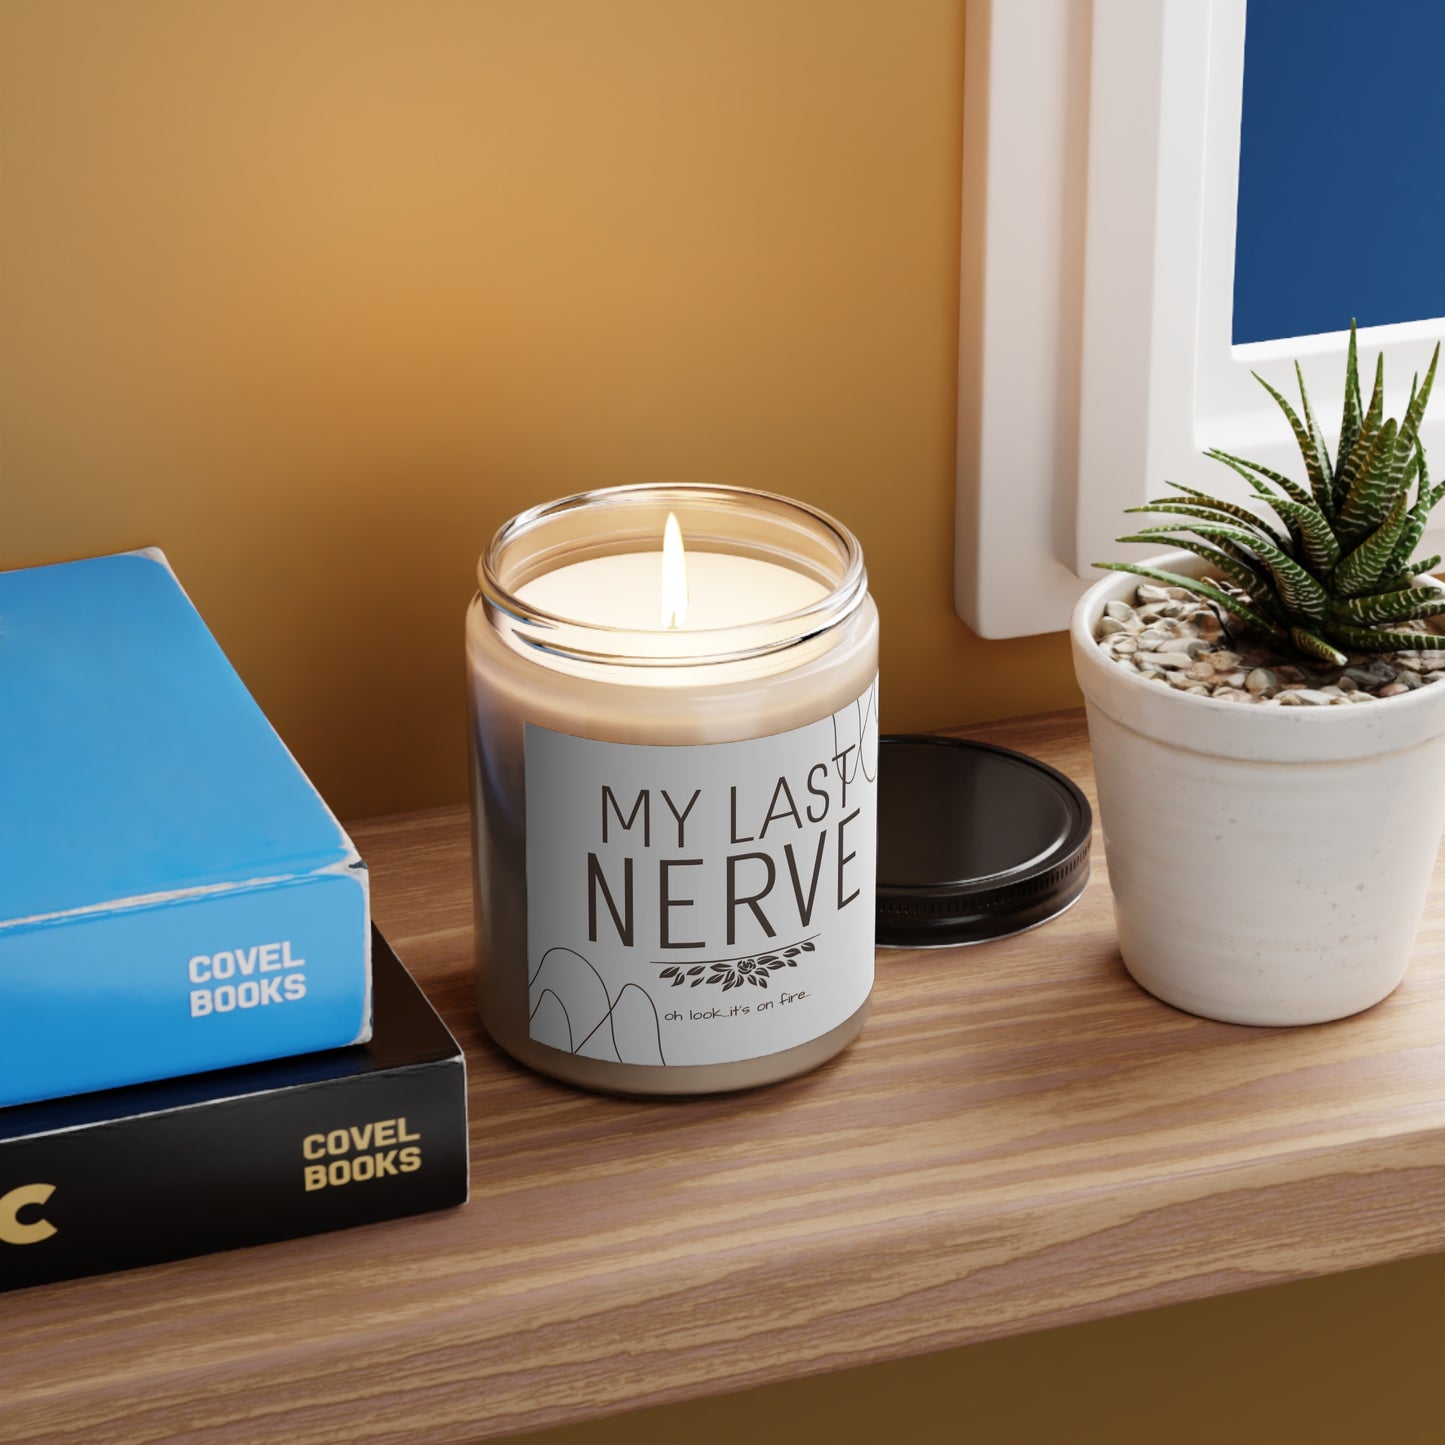 My Last Nerve Candle: Ignite Humor and Relaxation